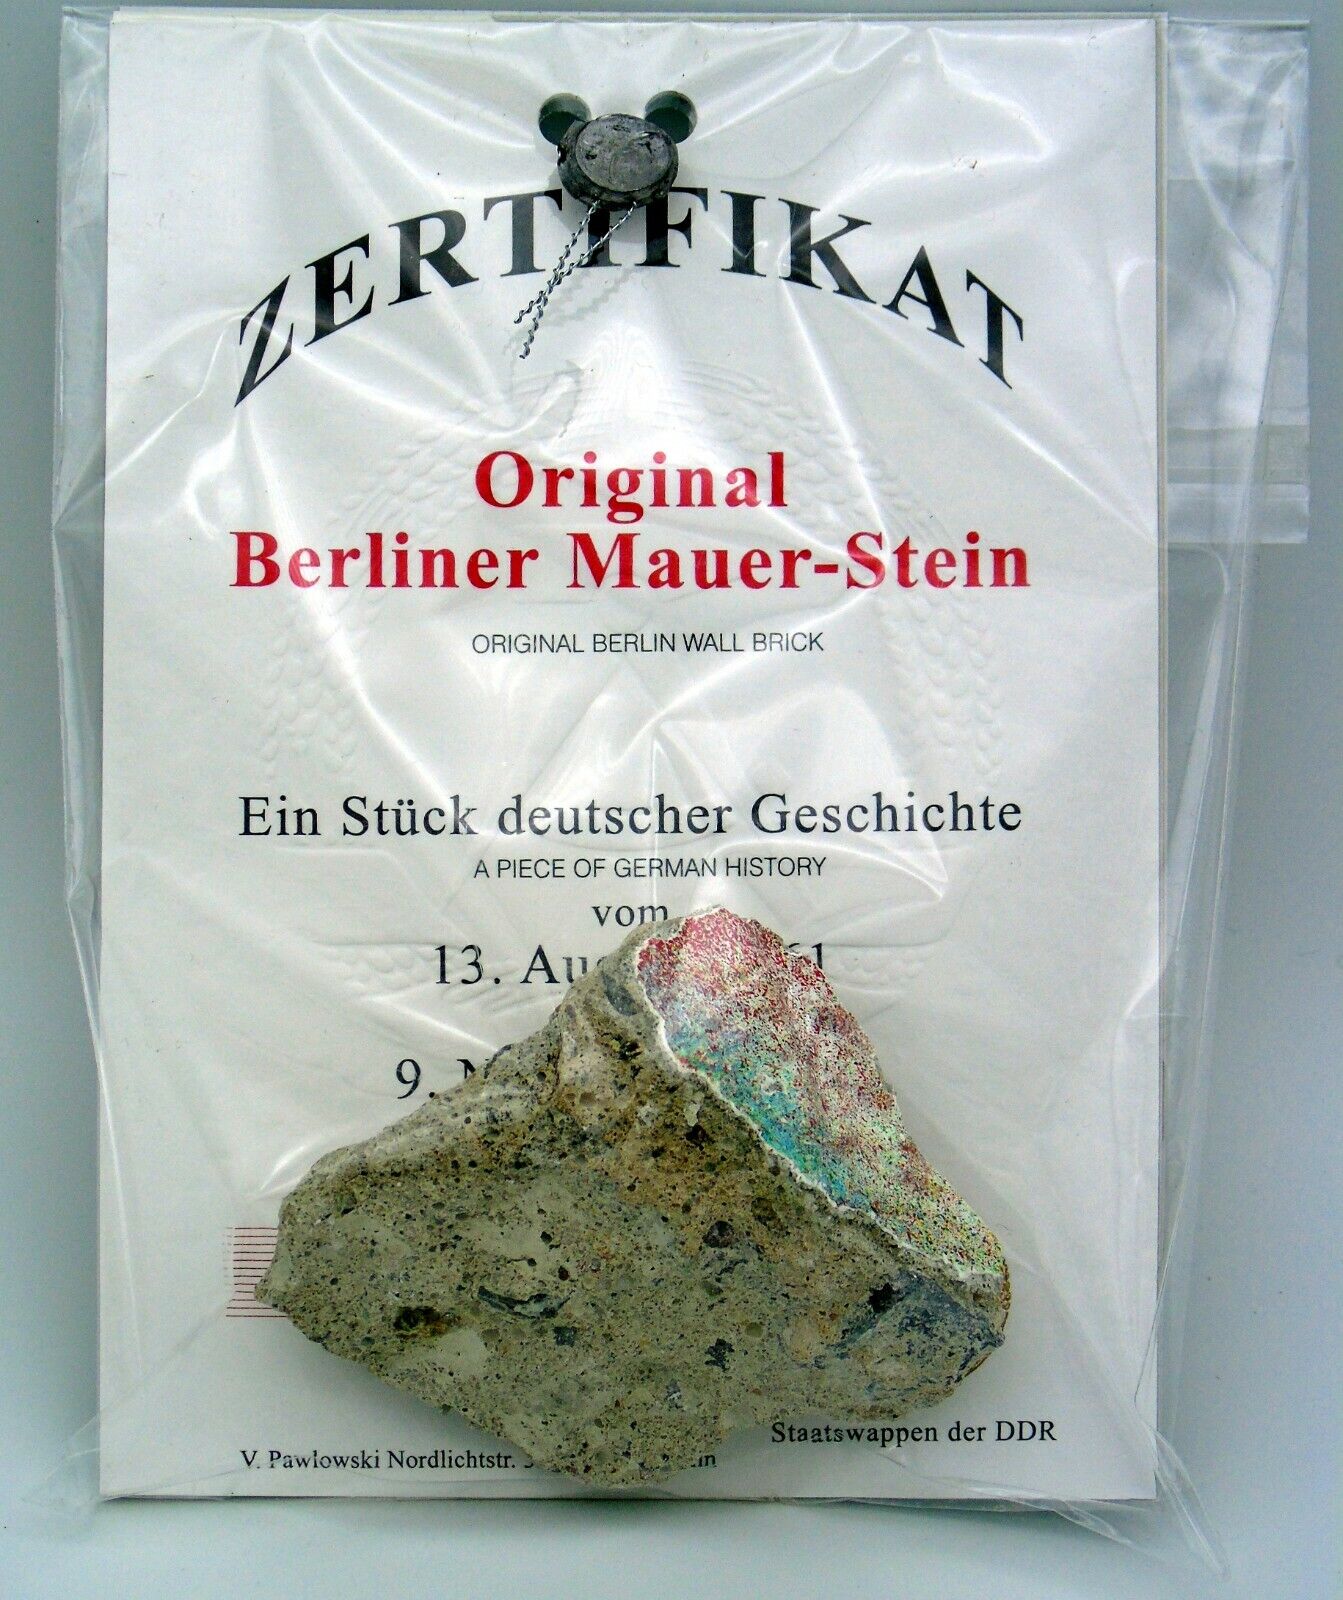 Large Authentic Piece of the BERLIN WALL with Certificate of Authenticity